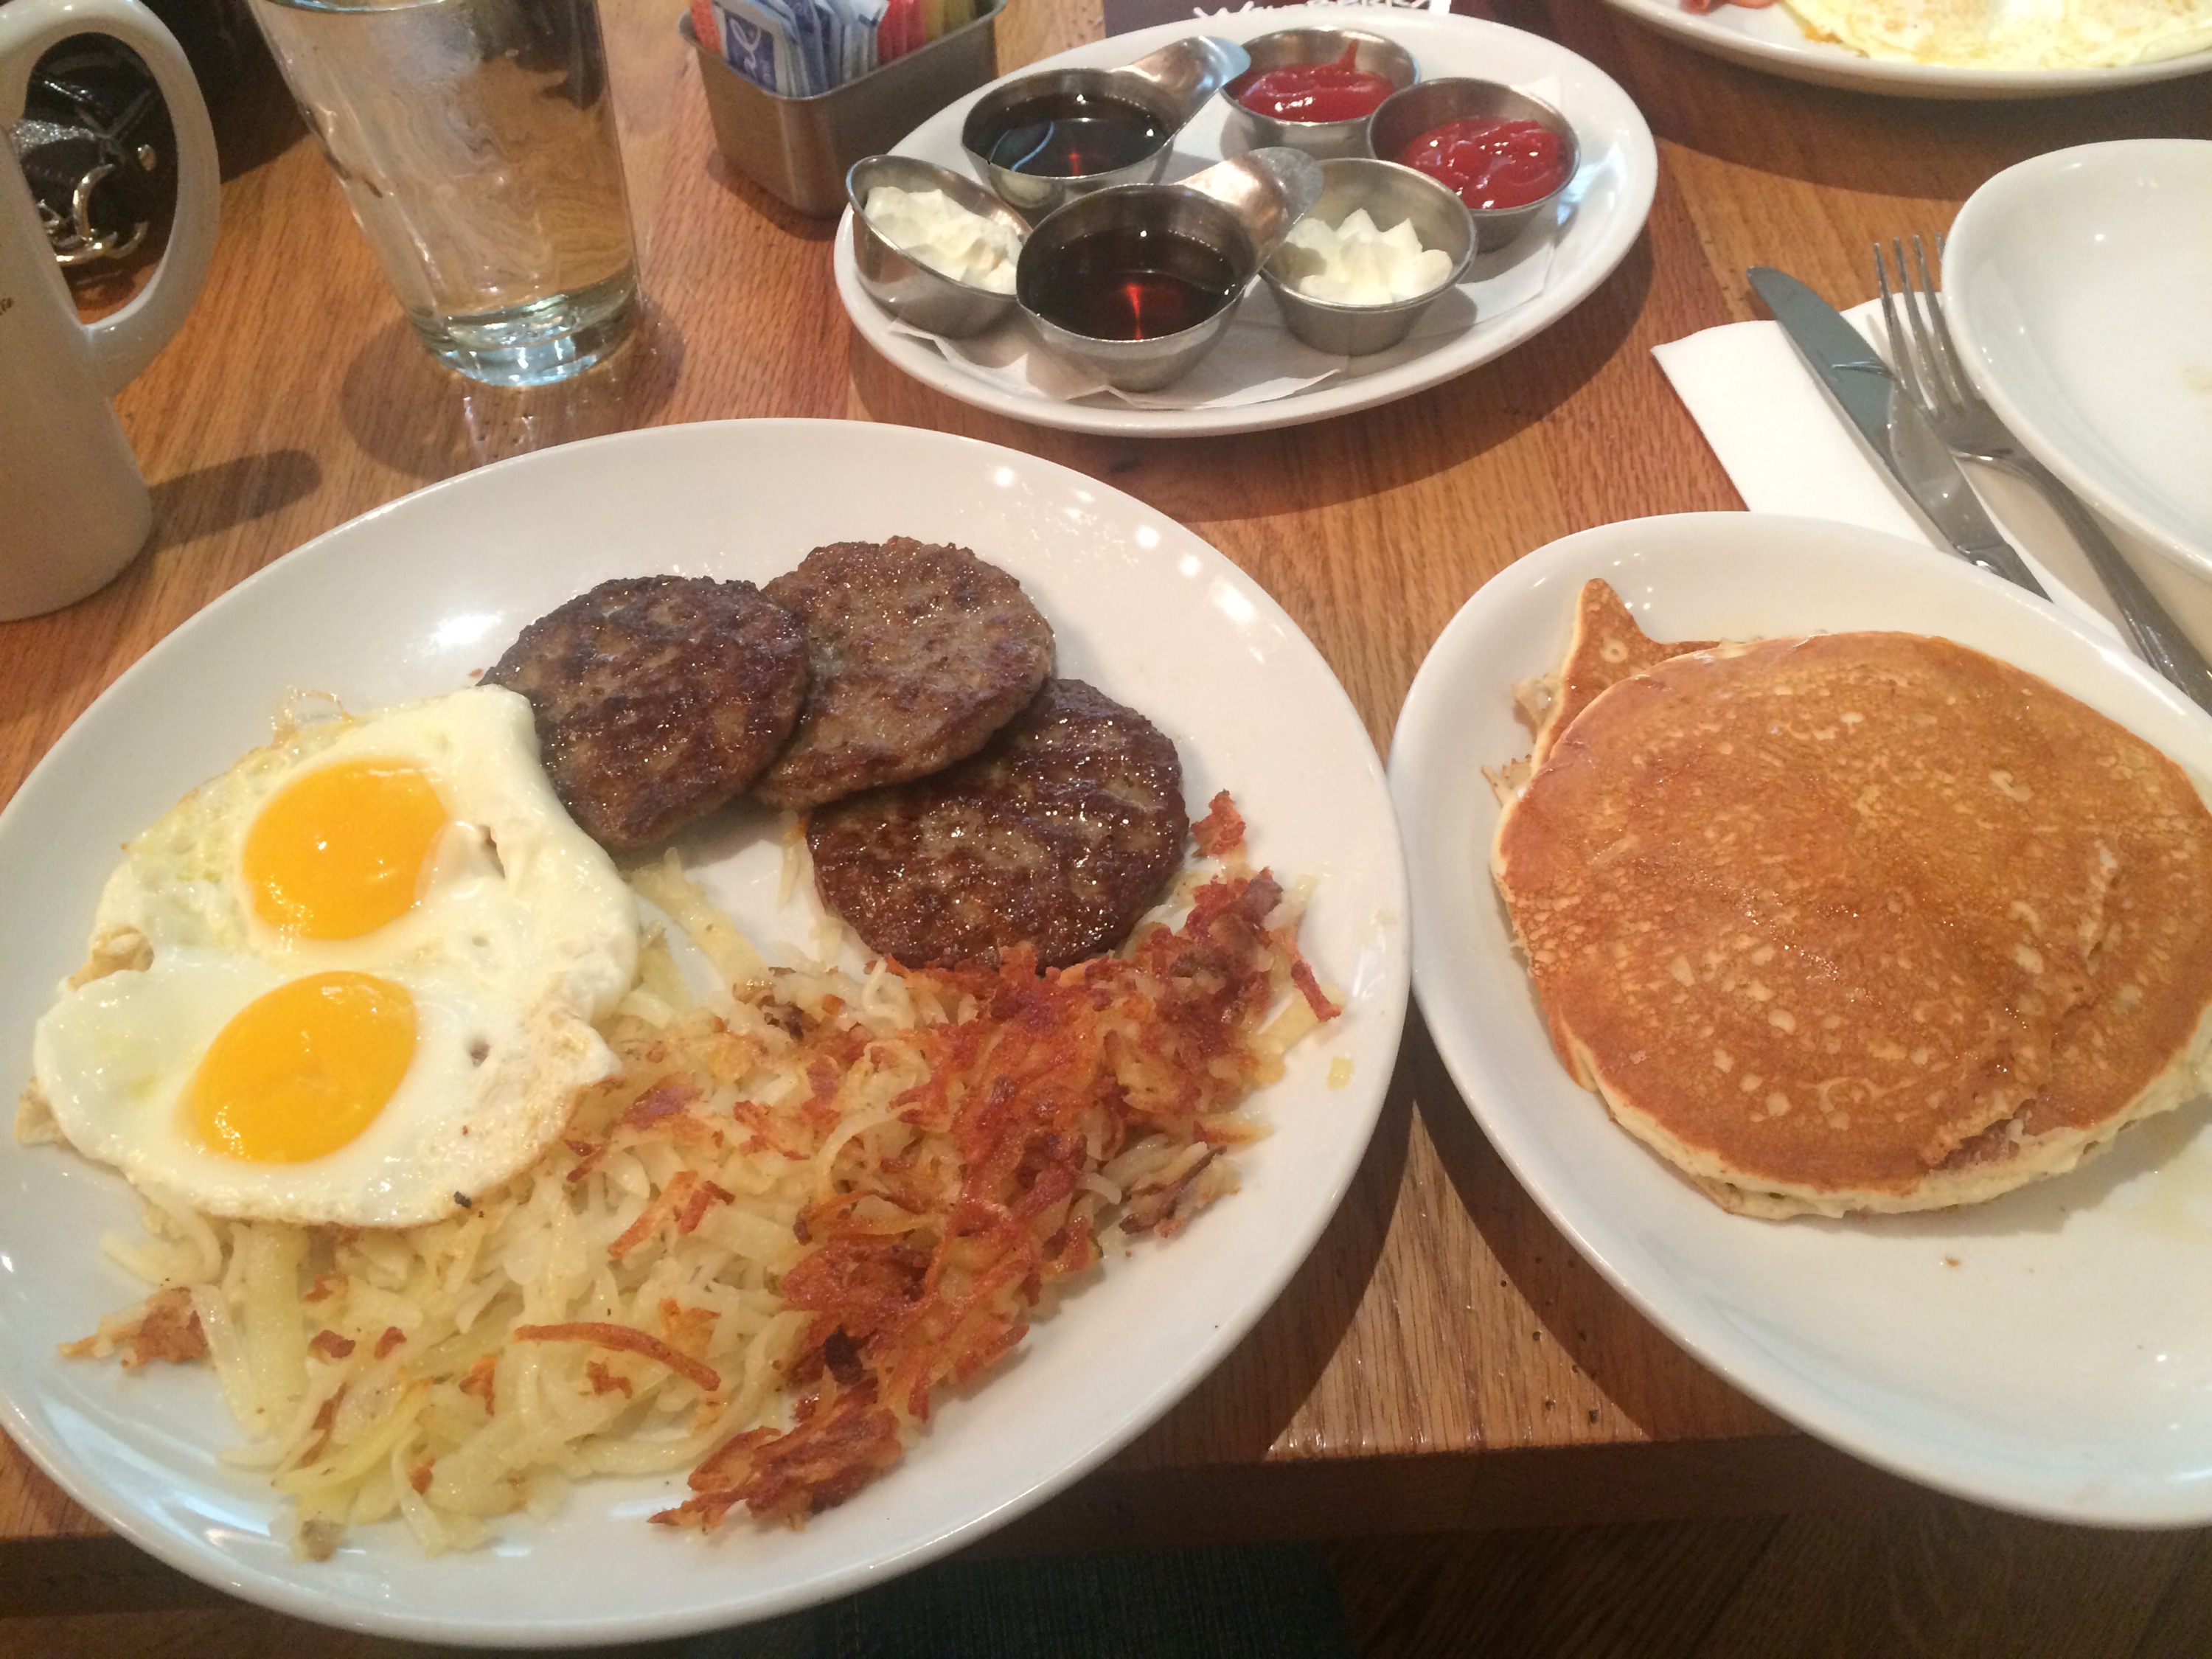 photo of a plate with eggs, hash browns, and sausage patties, and another plate of pancakes. Butter and toppings are on a smaller plate in the background.